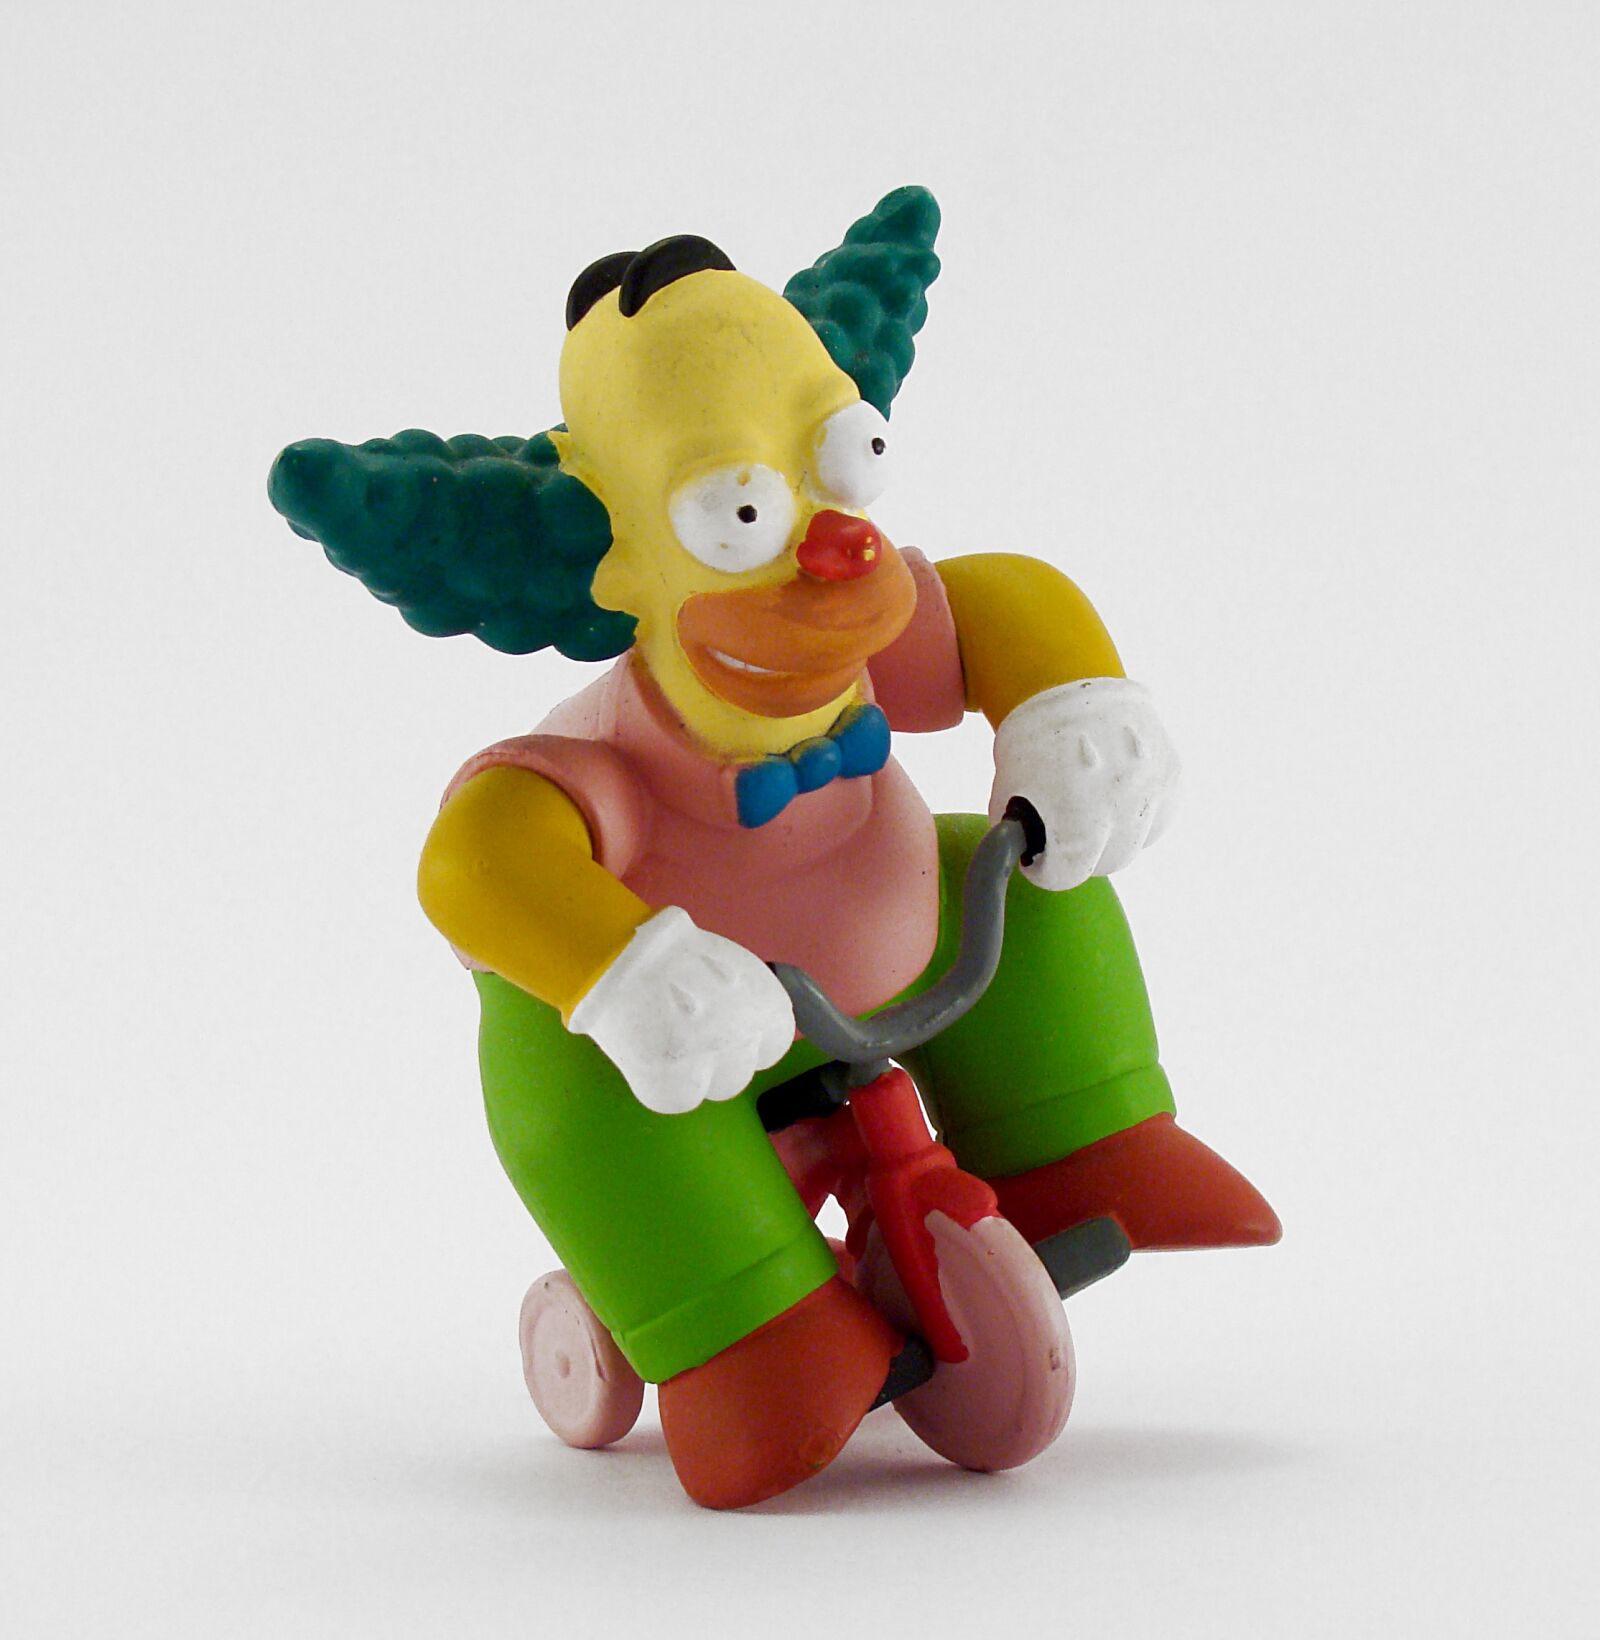 Sony DSC-H9 sample photo. Clown, simpsons, drawing photography